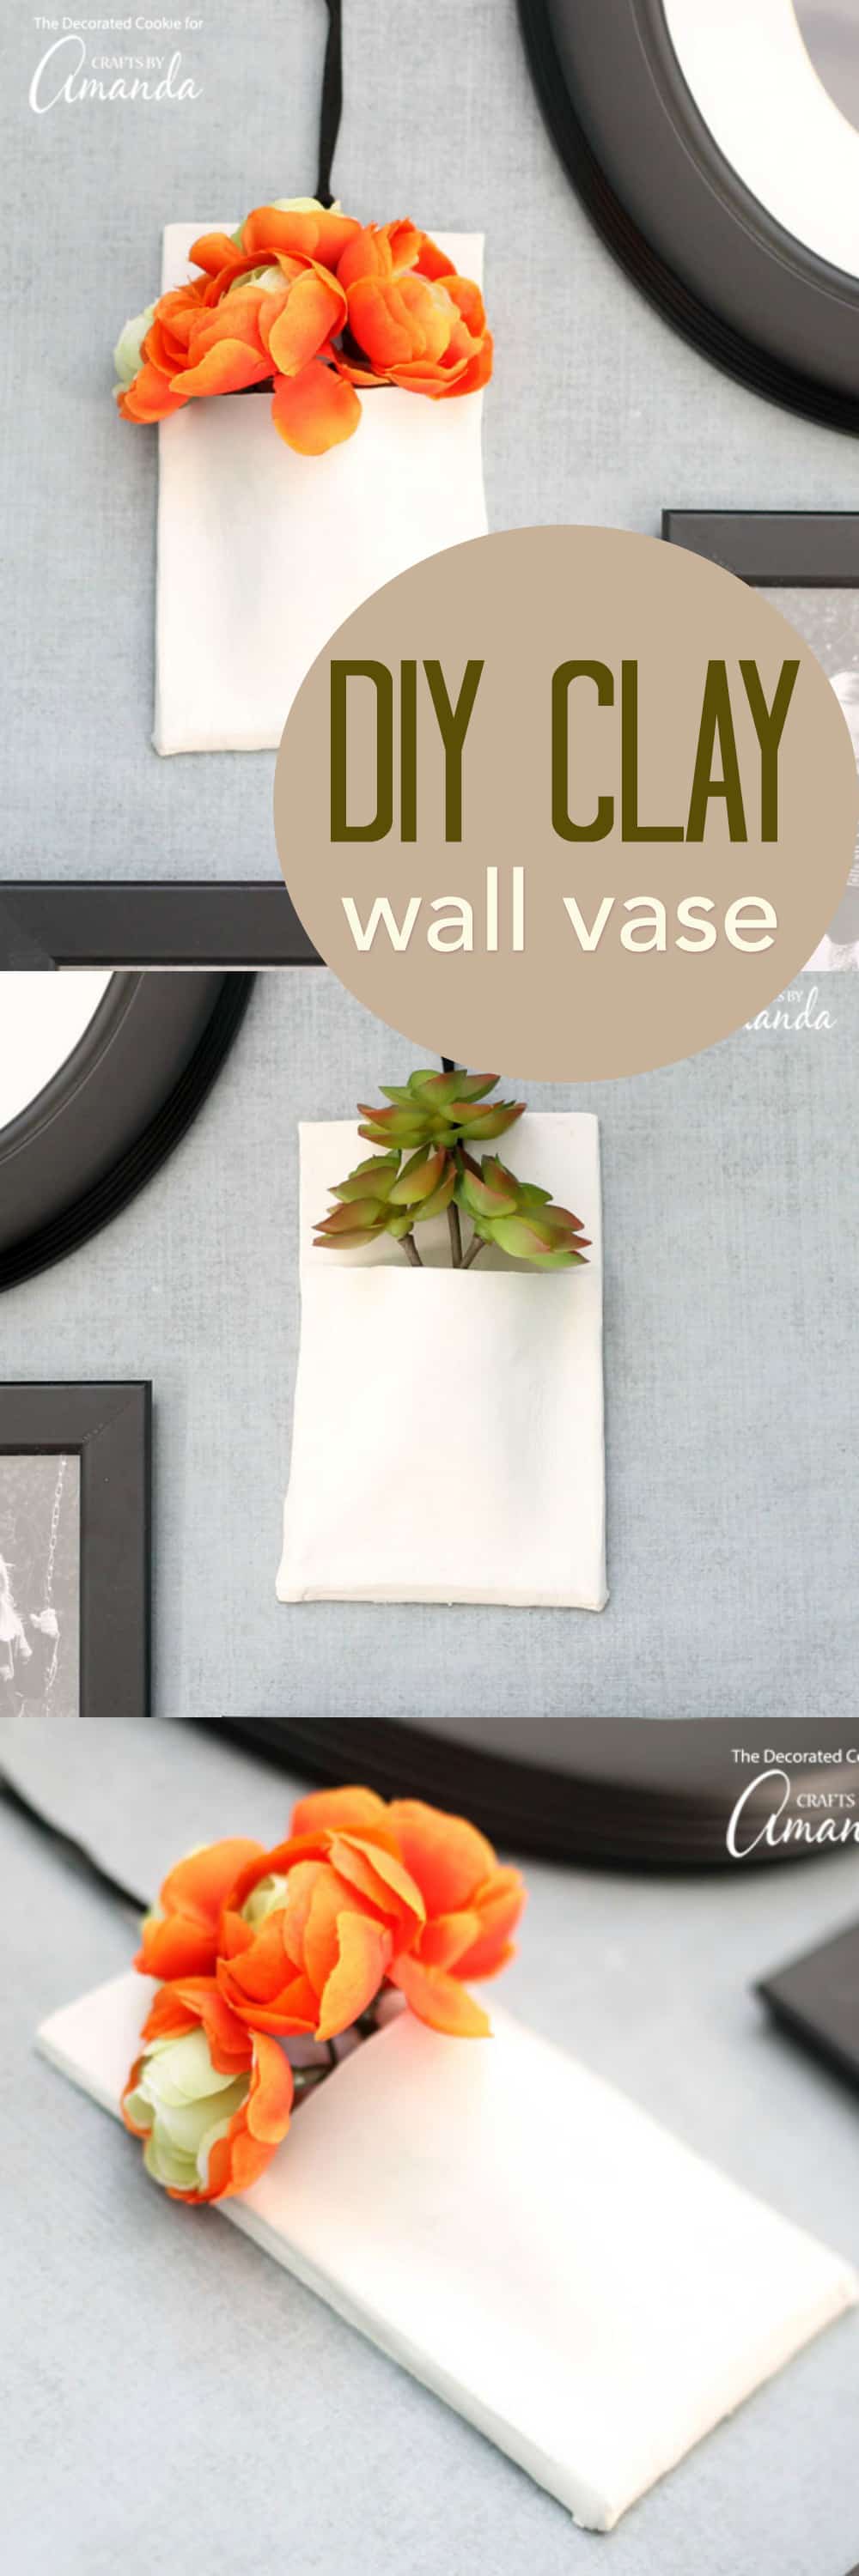 This DIY clay wall vase is simple to make and adds interest and beauty to your wall decor. Pop in some succulents, faux flowers, or even use it to store your spare set of glasses or keys.